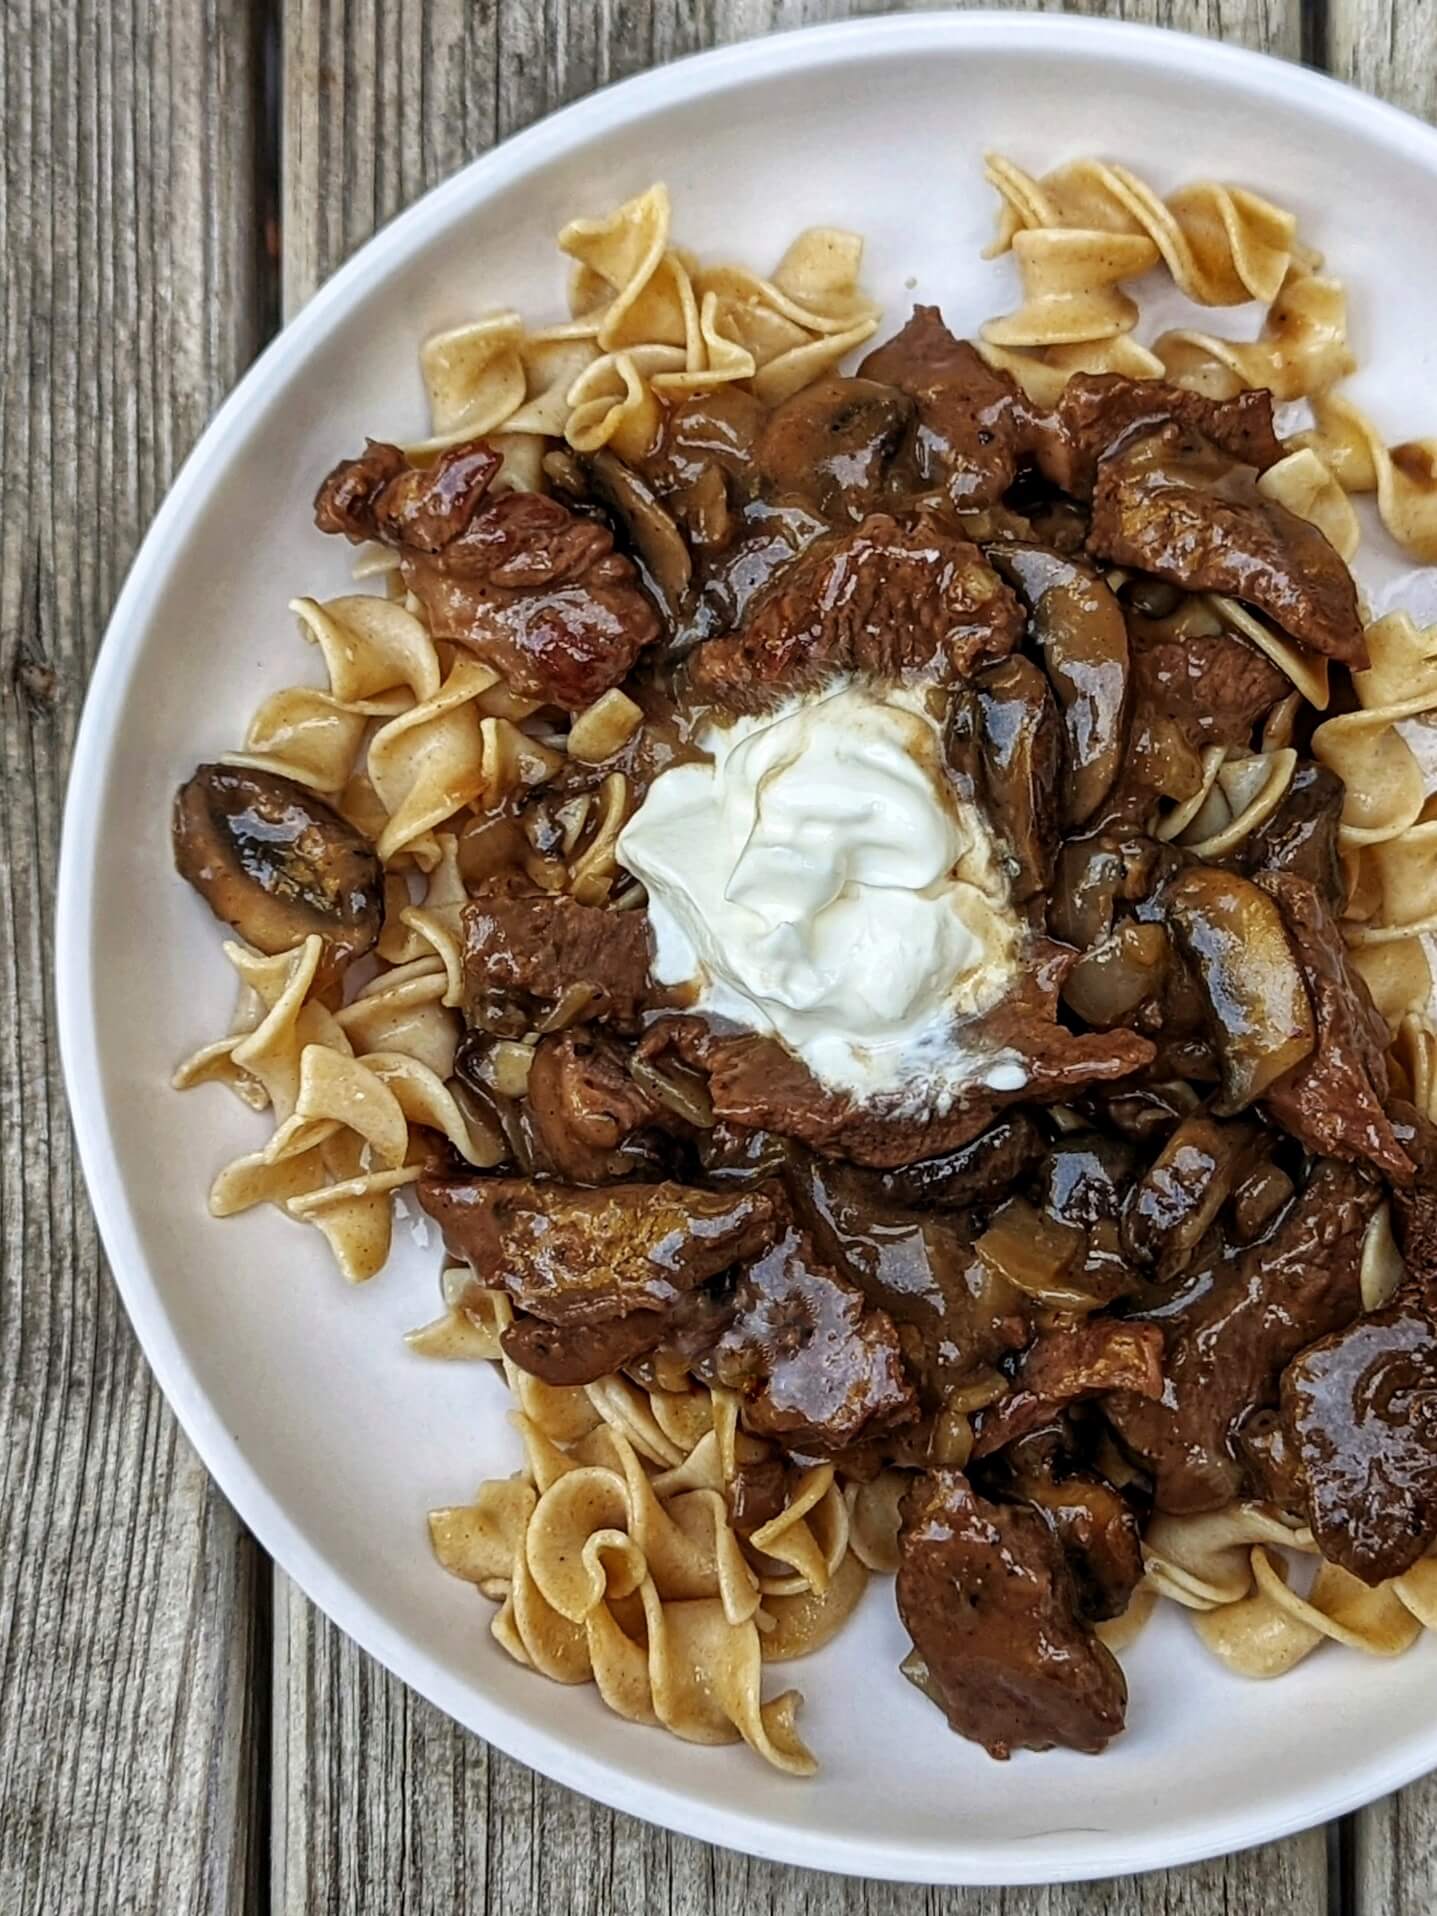 Make an Appealing 30-Minute Beef Stroganoff Recipe for an Enjoyable Evening Meal